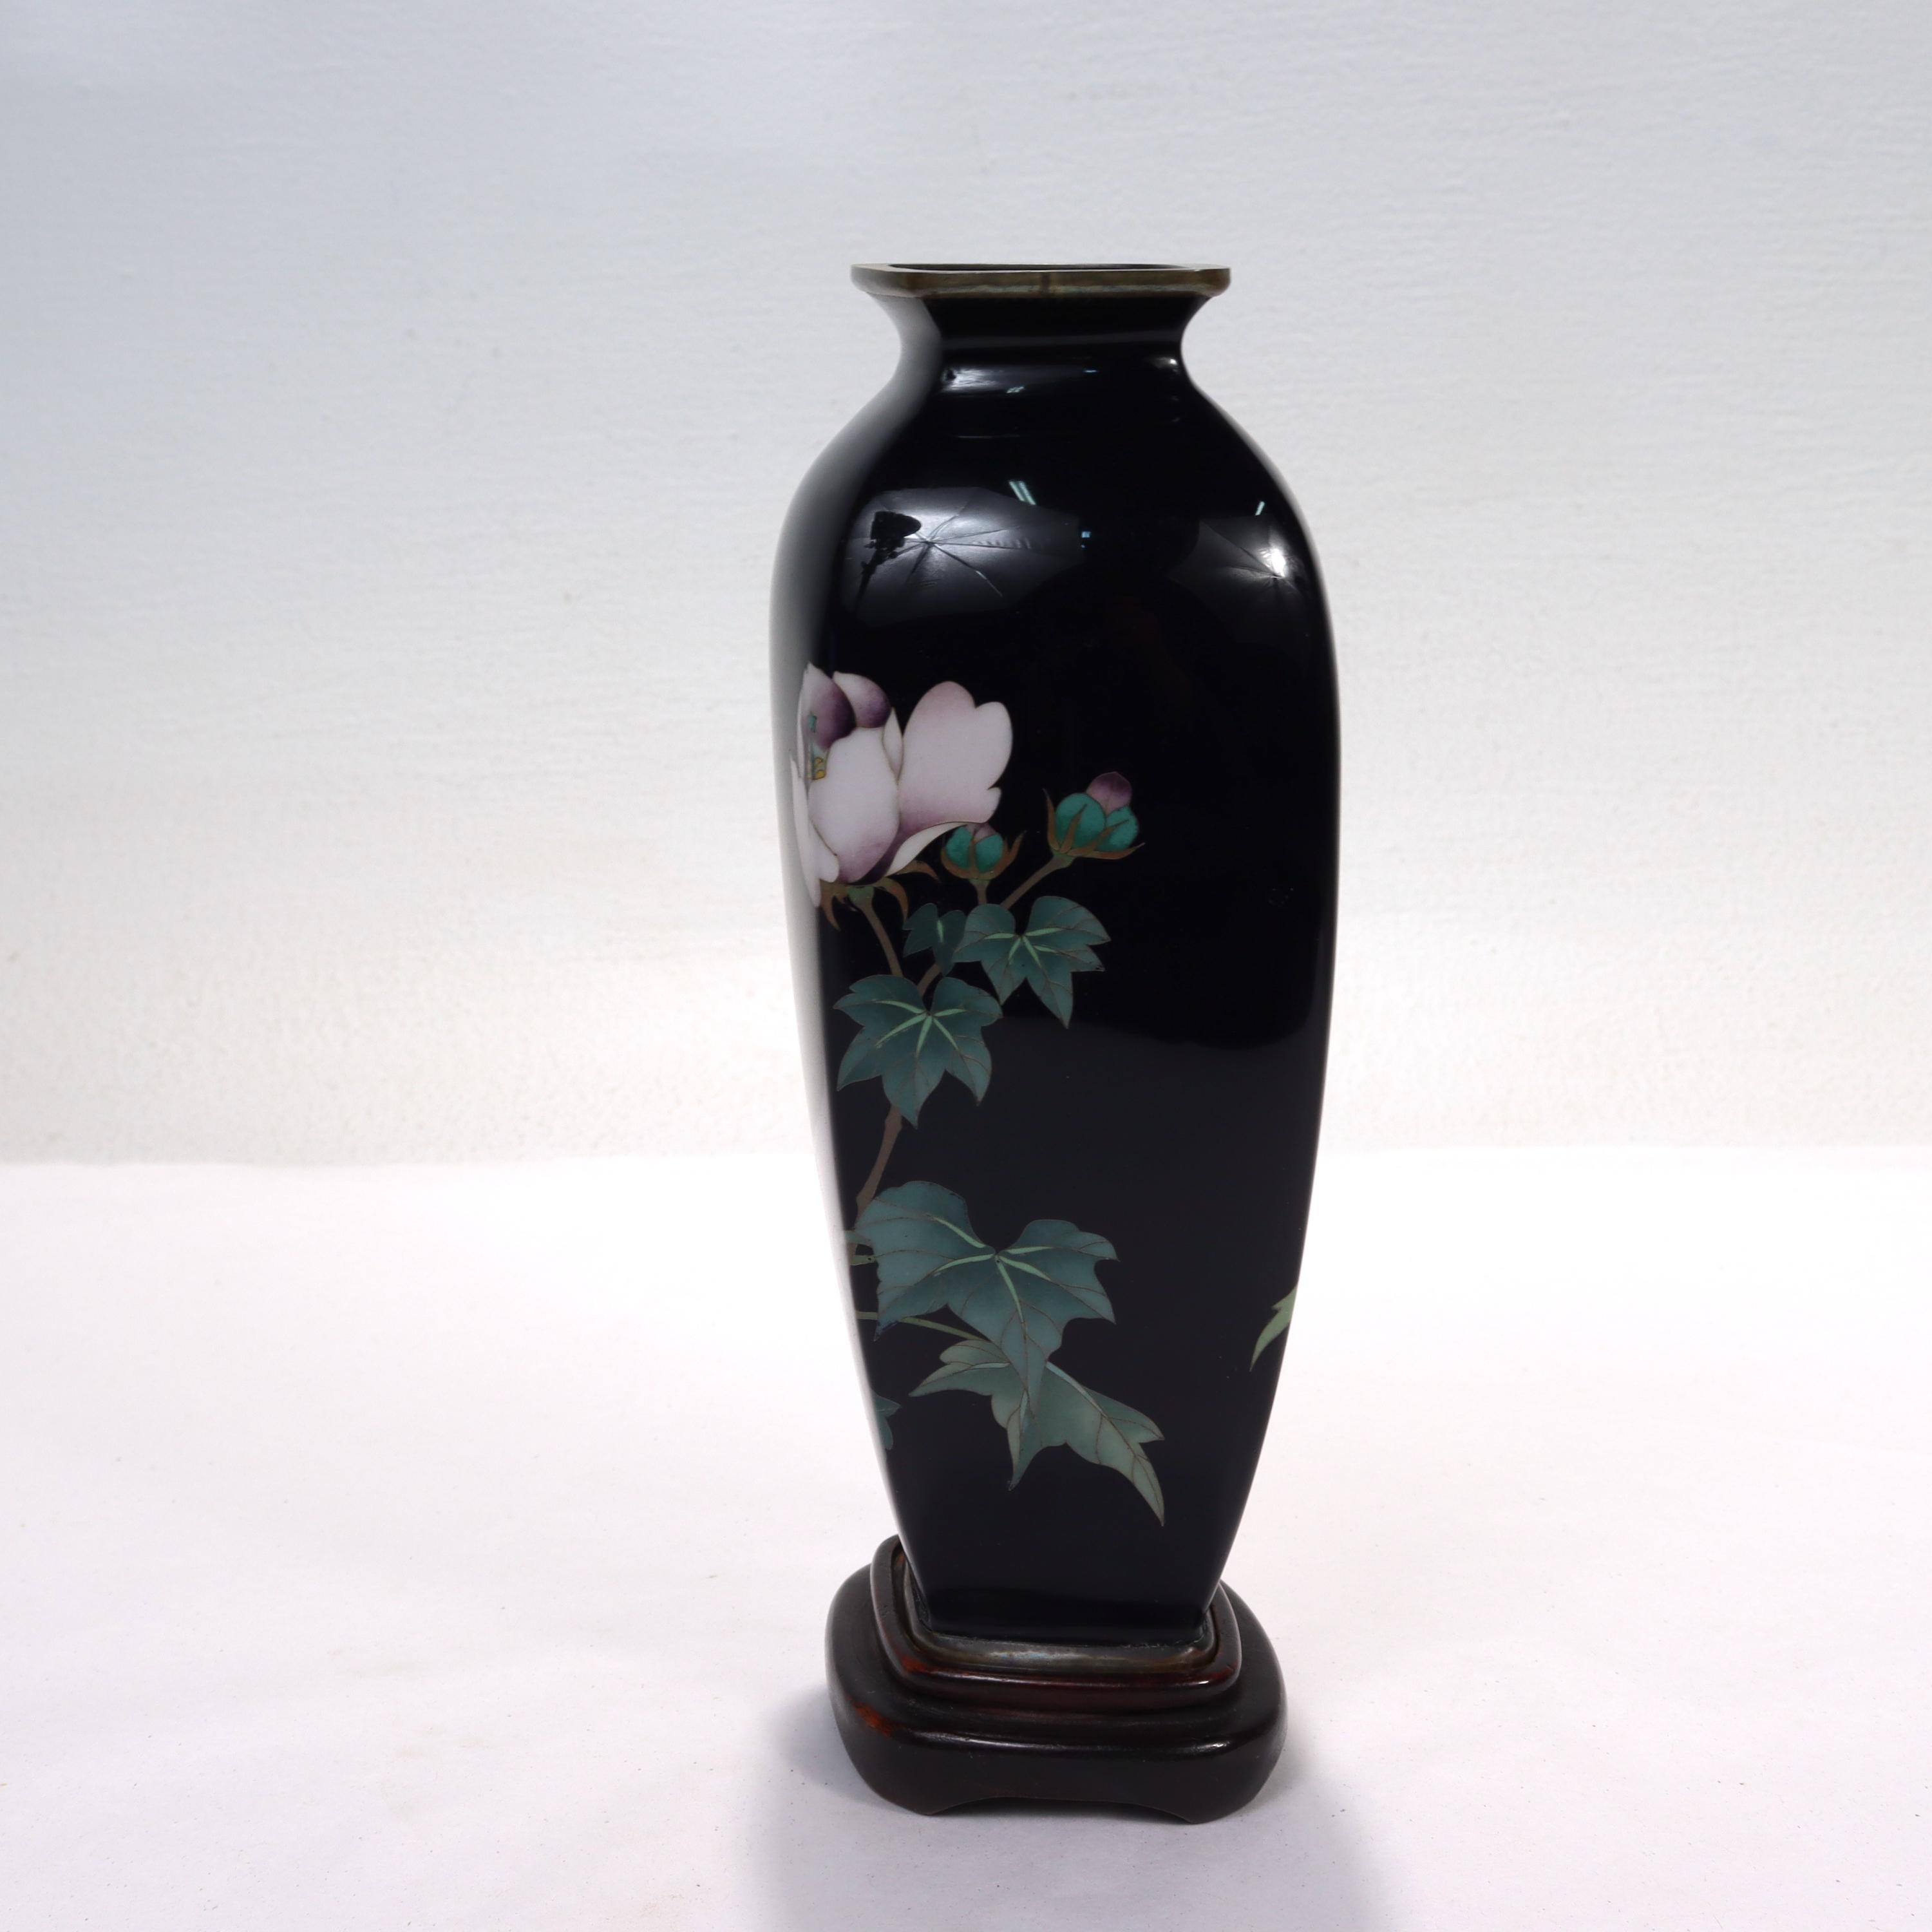 Old or Antique Japanese Wired Cloisonne Enamel Vase with White Flowers 1